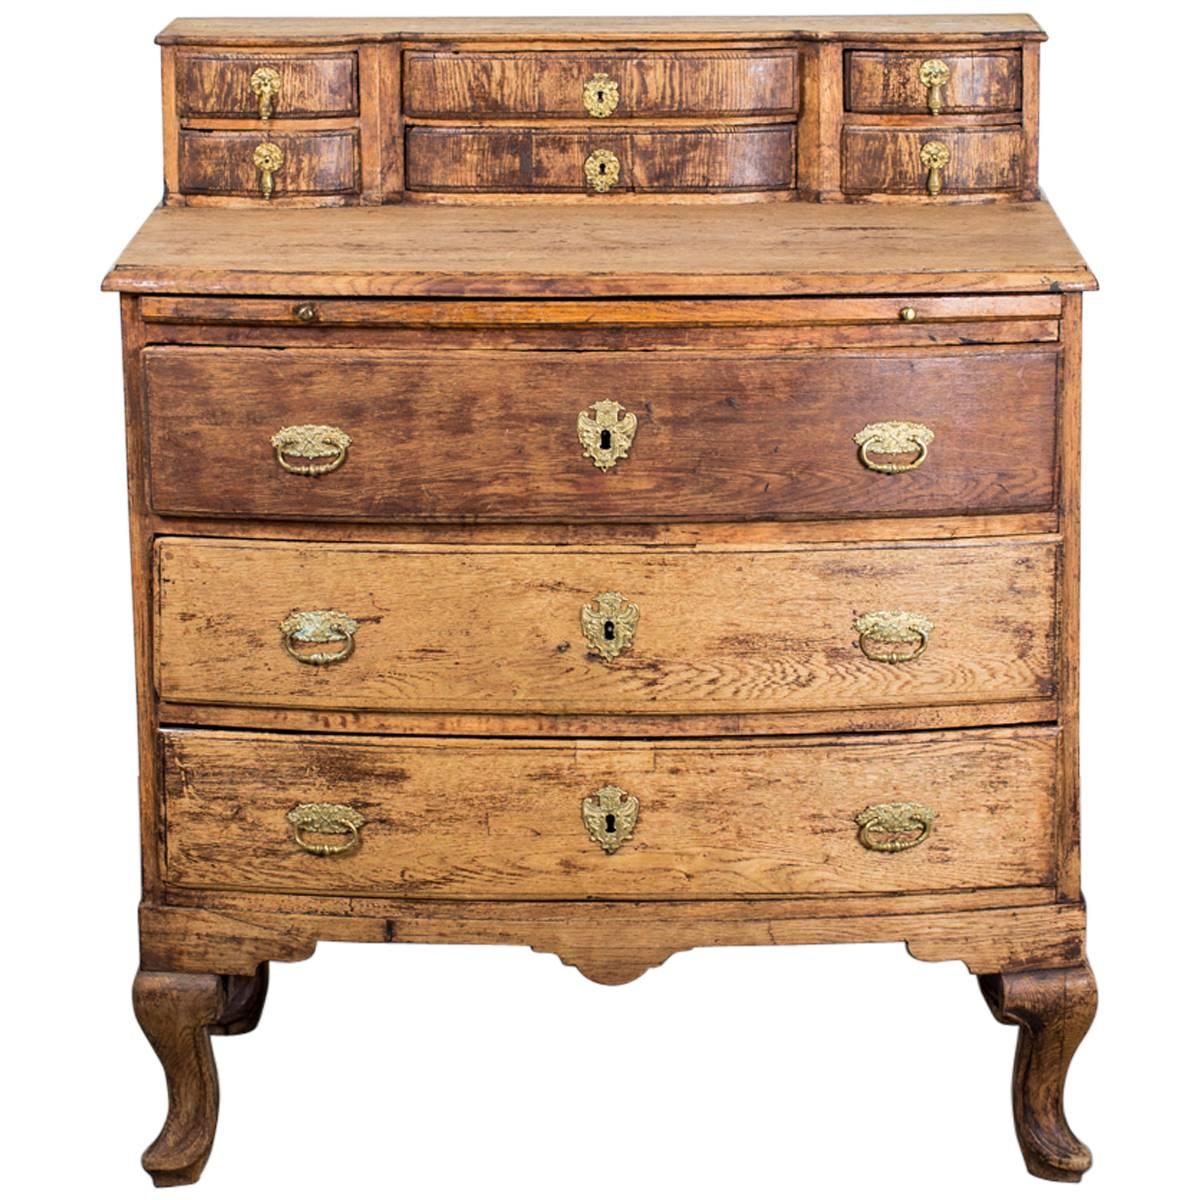 Chest with Pull-Out Writing Desk, Dutch, Baroque, Northern Europe